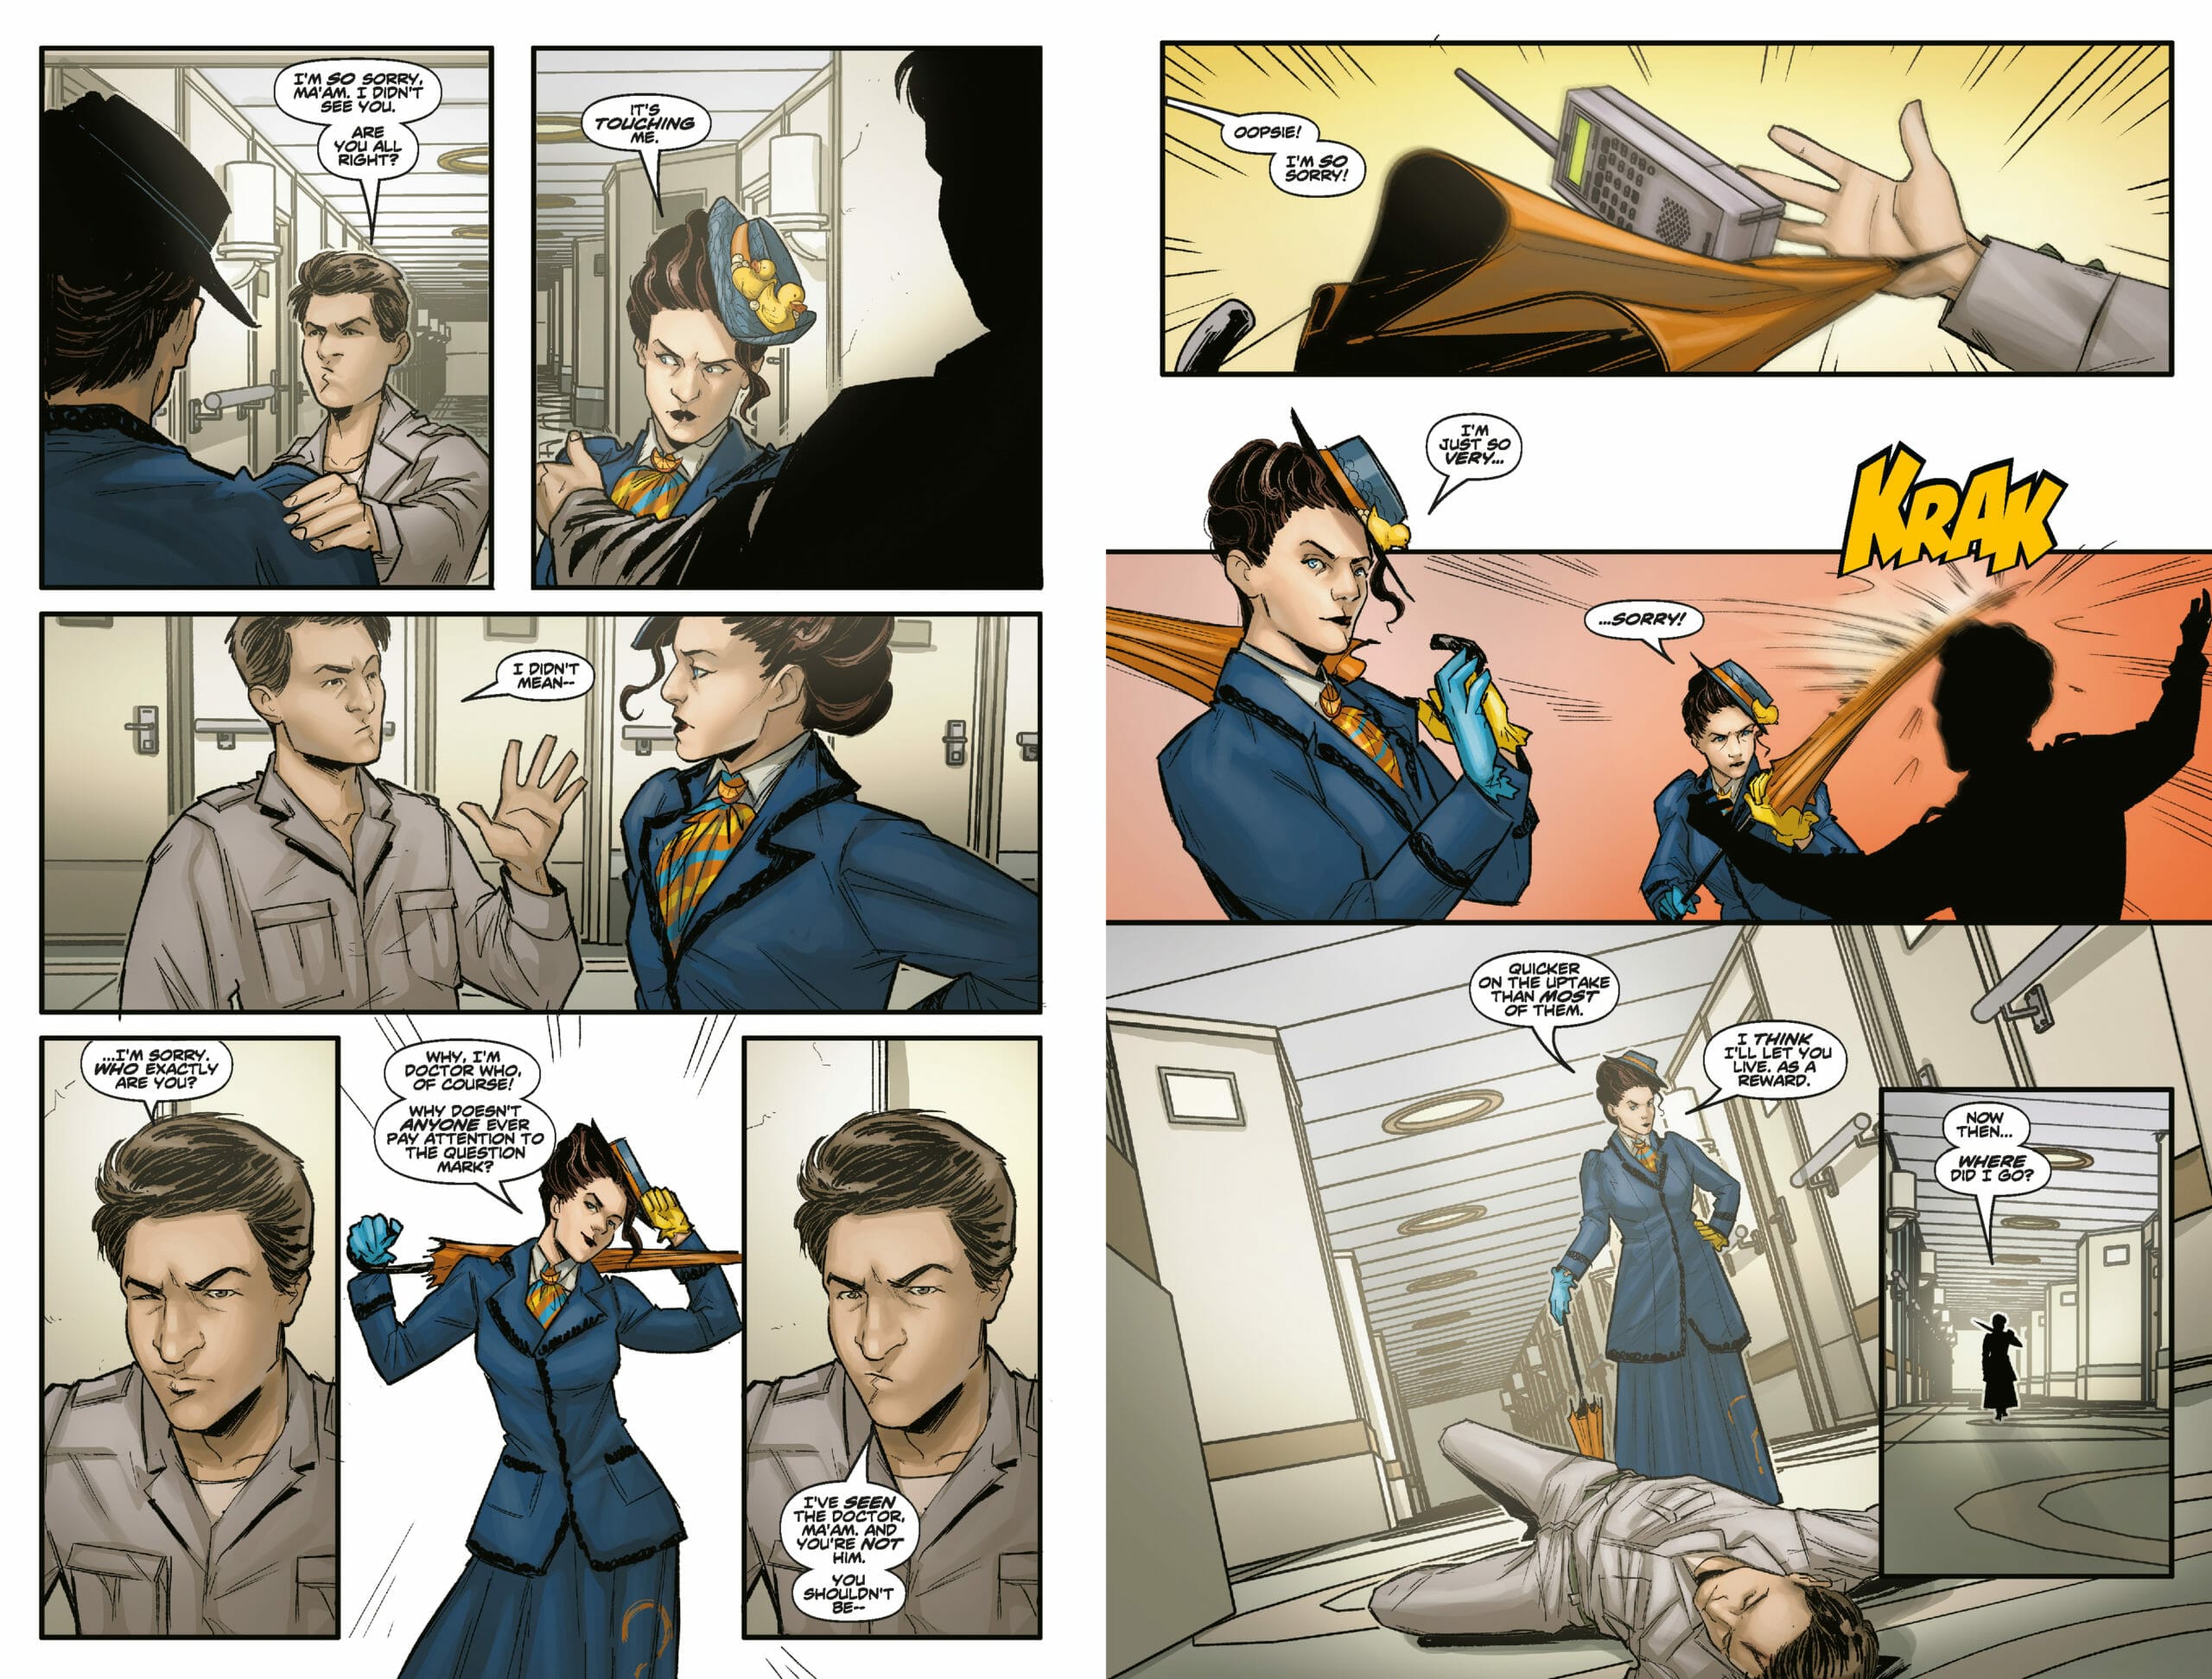 A review of Doctor Who's Missy comic book